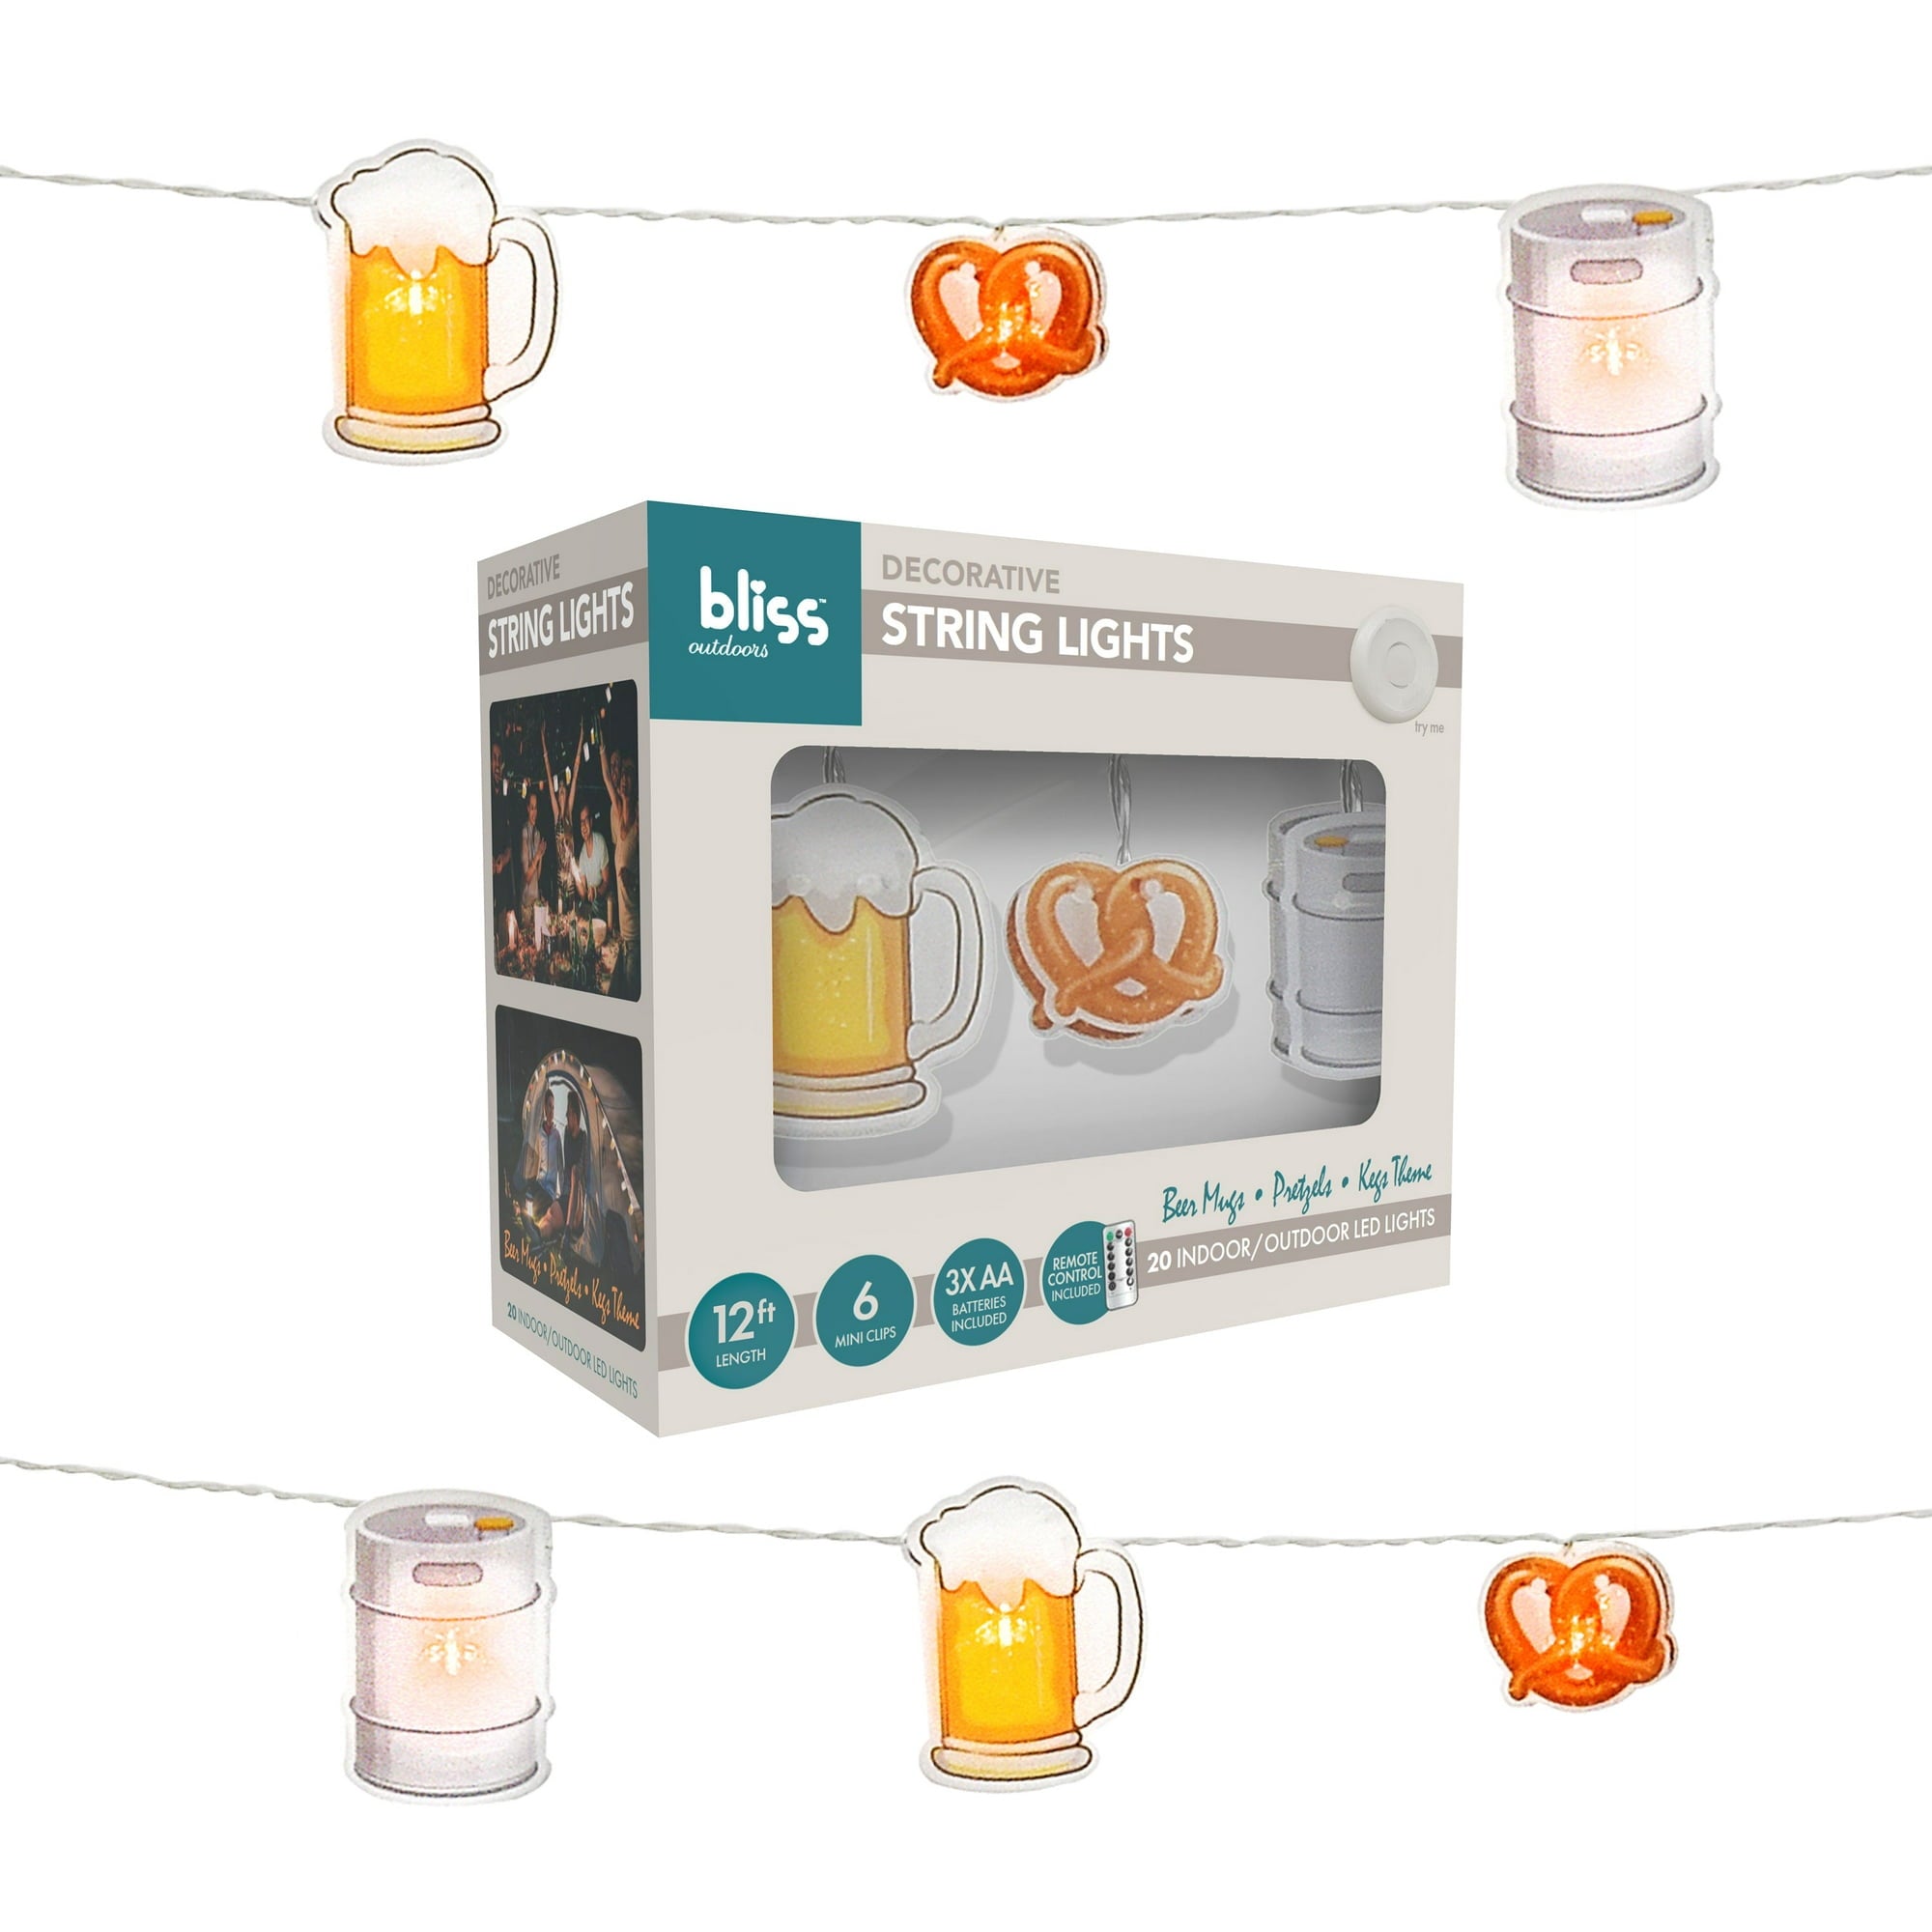 Bliss Hammocks Bliss Outdoors BSL-300-BKP 12 Ft Themed String Lights w/ Hanging Clips, 20 LEDs & Remote, Camping, Backyard, Garden, Balcony Parties, Battery Operated , 8 Lighting Modes (Beer & Pretzel)